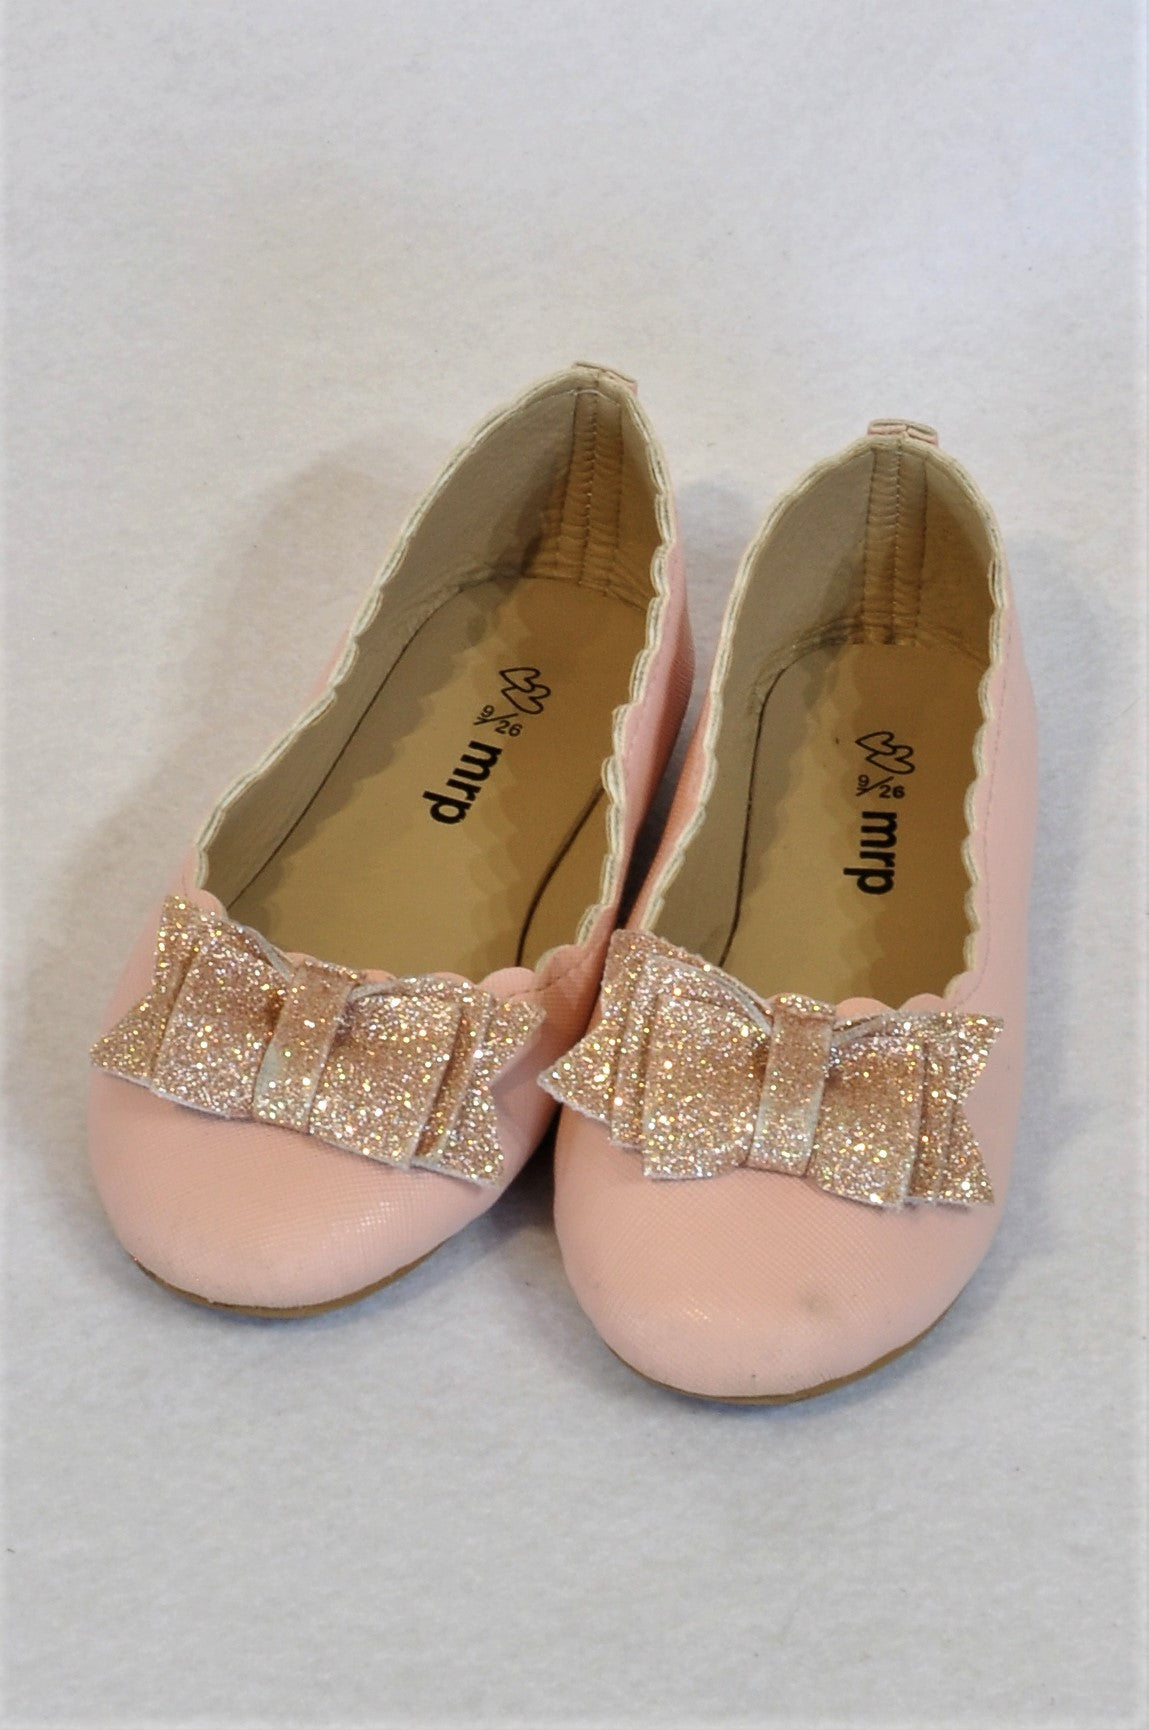 Mr. Price Size 9 Pink Pump Shoes Girls 